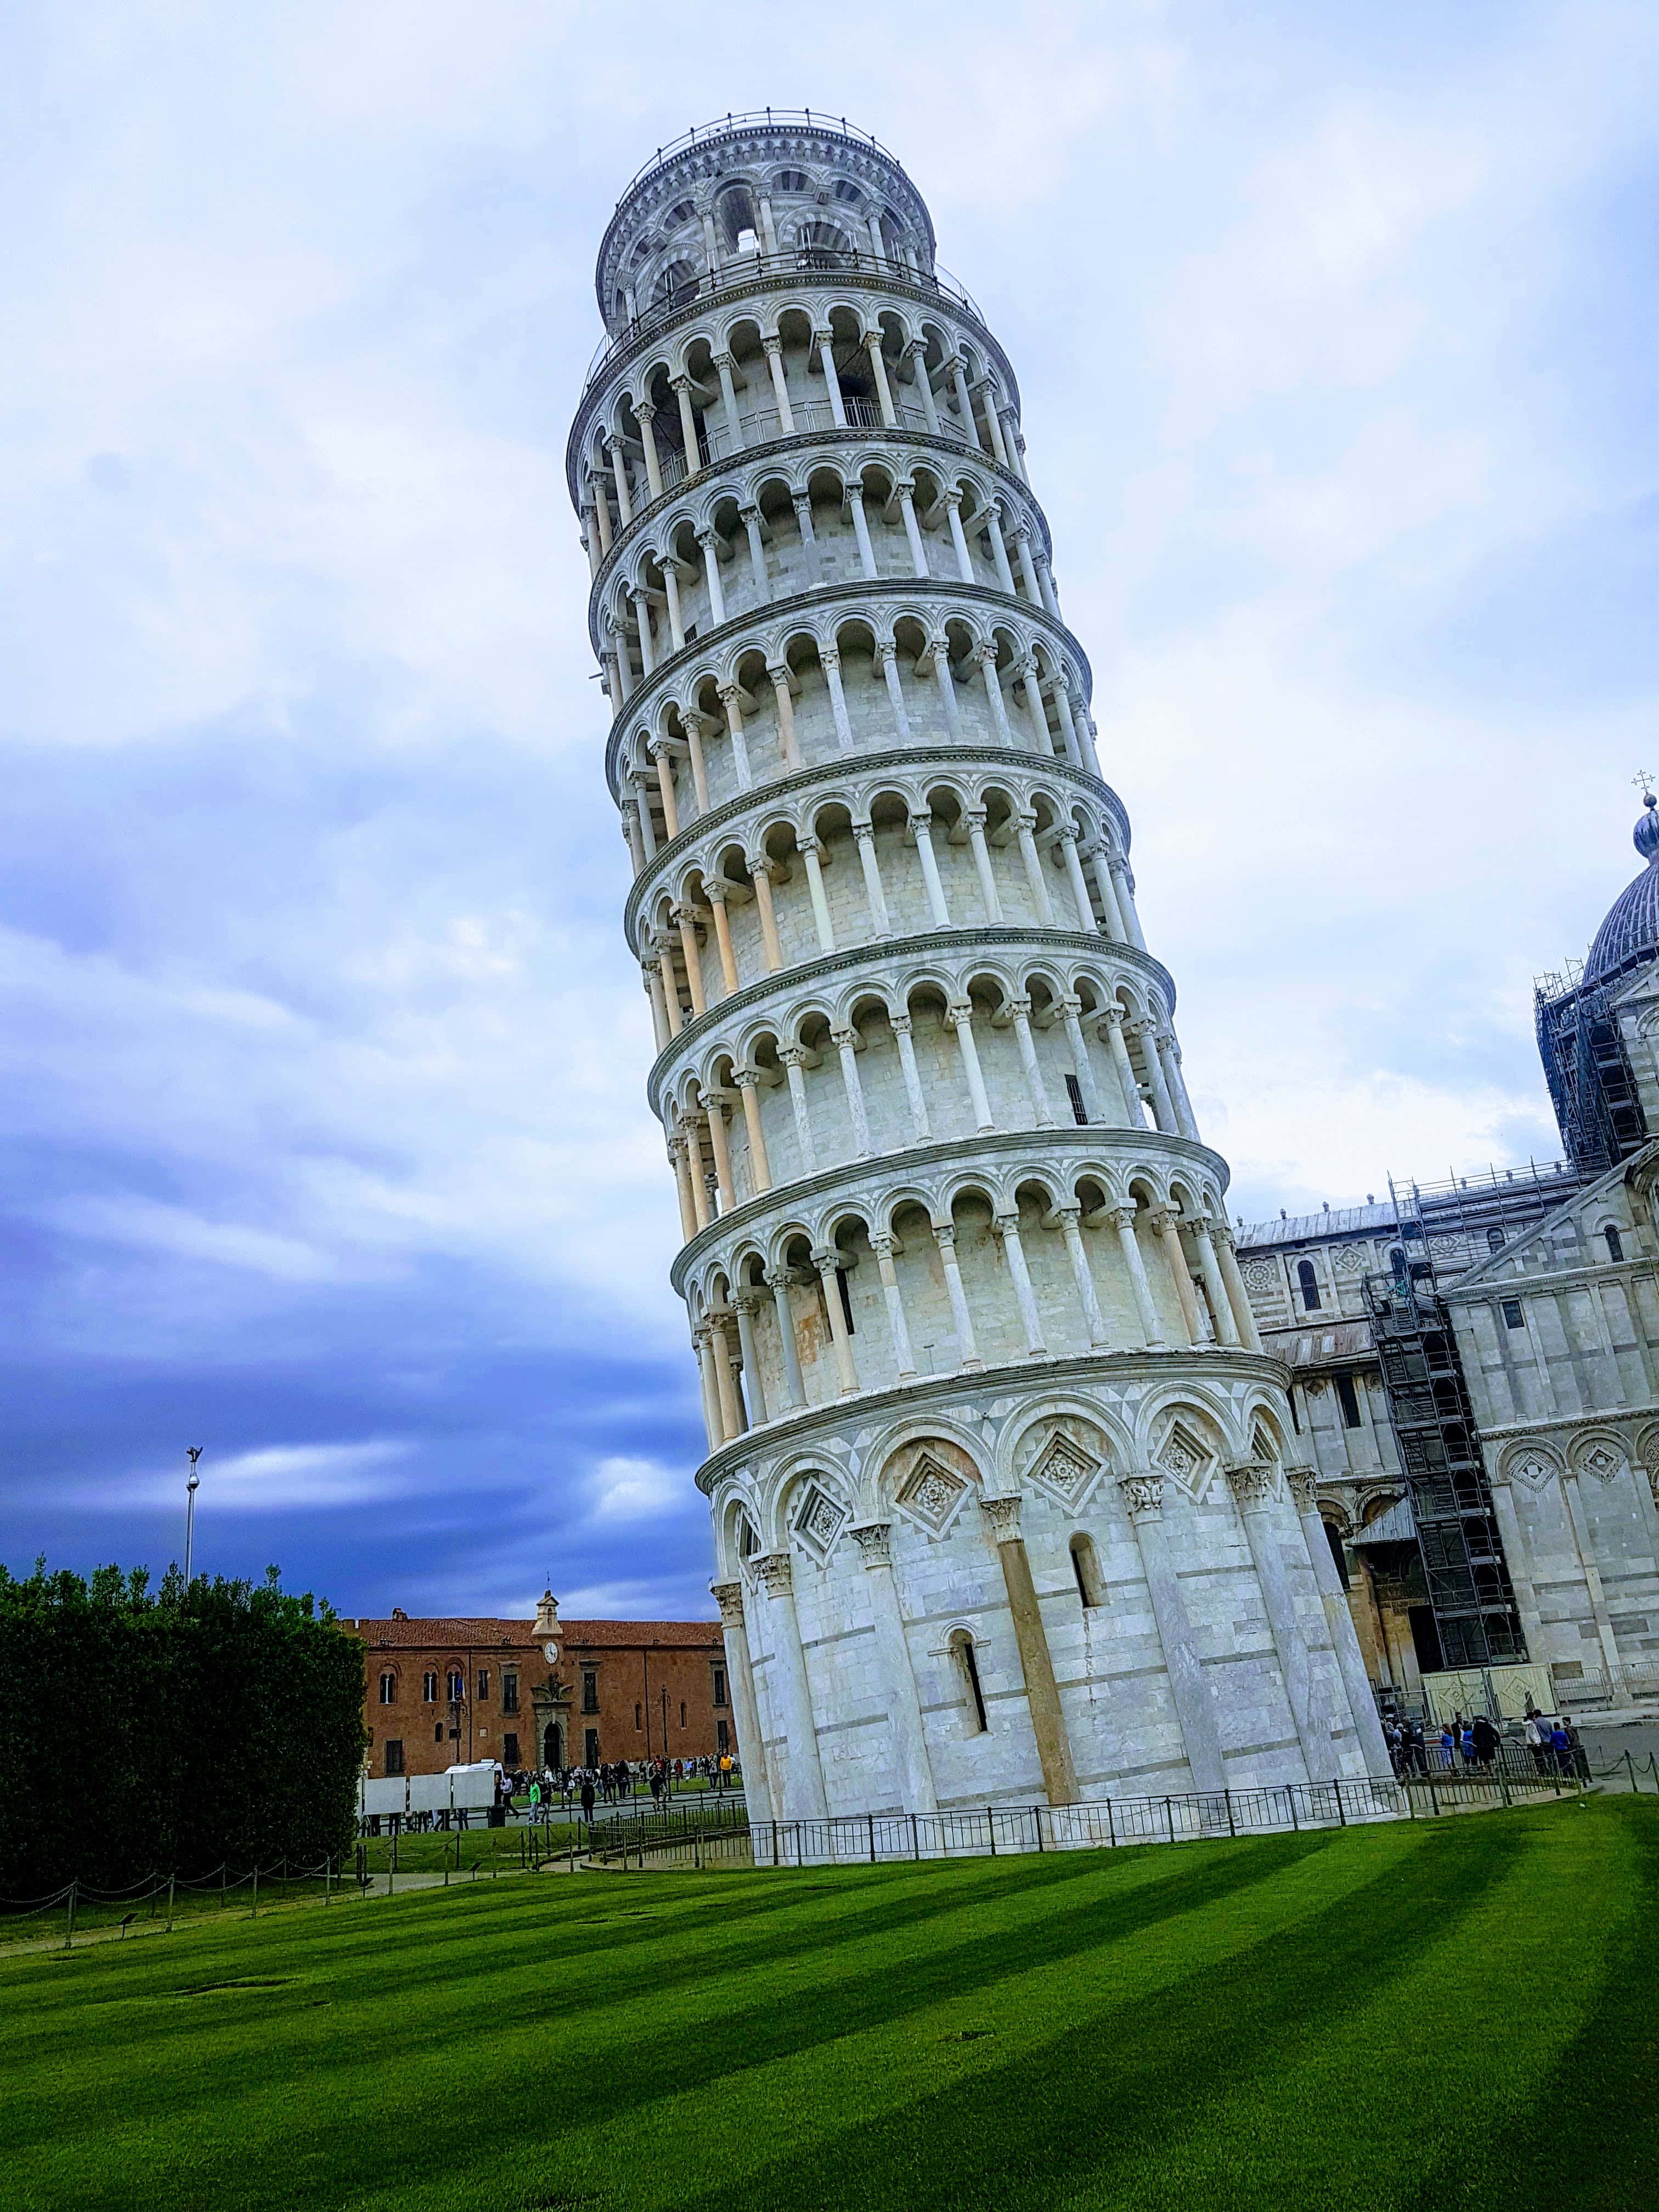 pictre of the pizza tower in italy